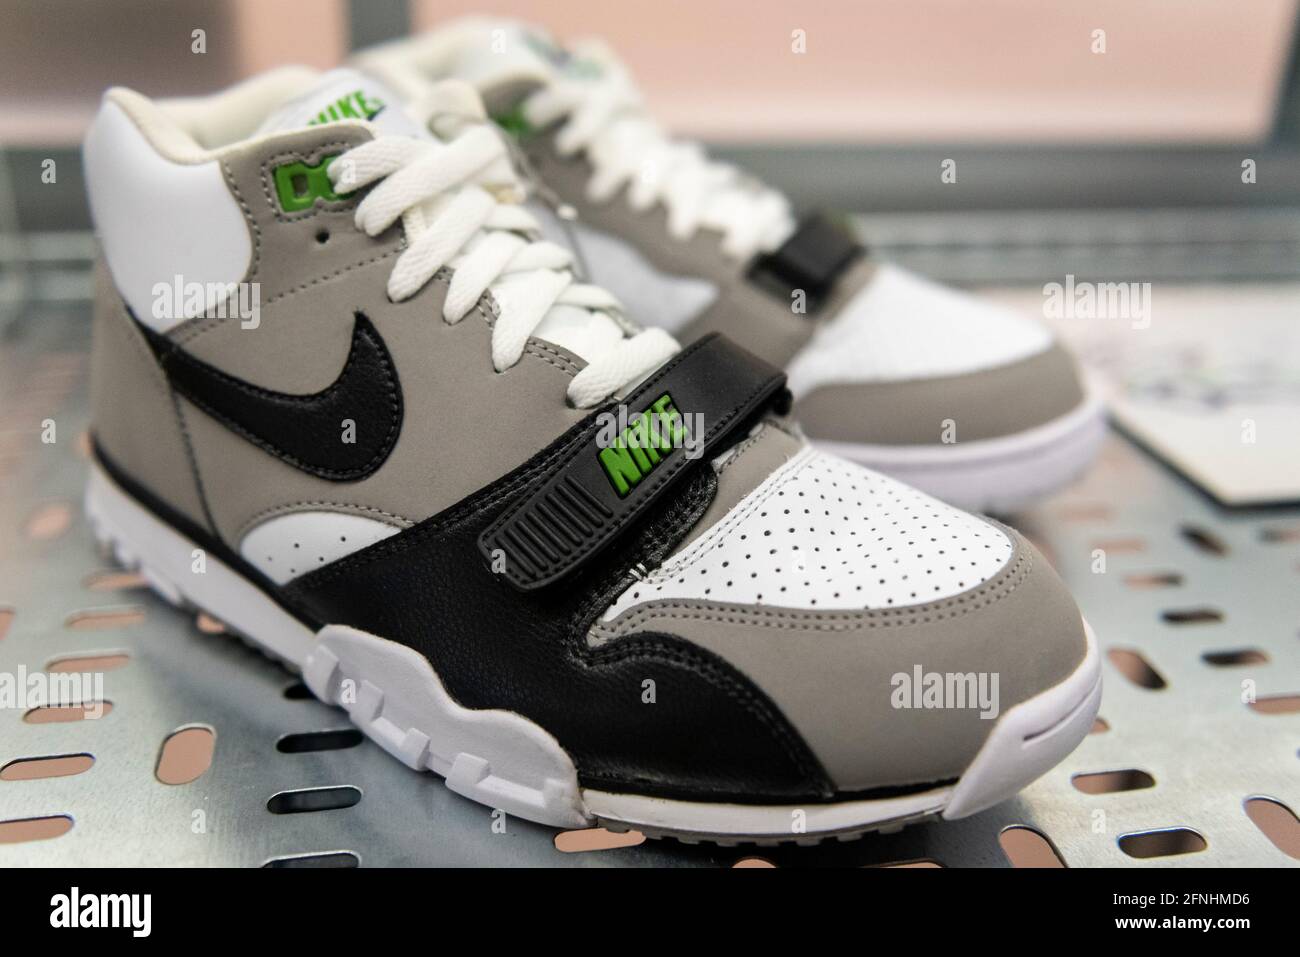 London, UK. 17 May 2021. "Nike Air Trainer, Chlorophyll", 2012, first  released 1987 and the first multi-purpose 'cross-trainer', debuted by John  McEnroe in 1986. Preview of “Sneakers Unboxed: Studio to Street” at